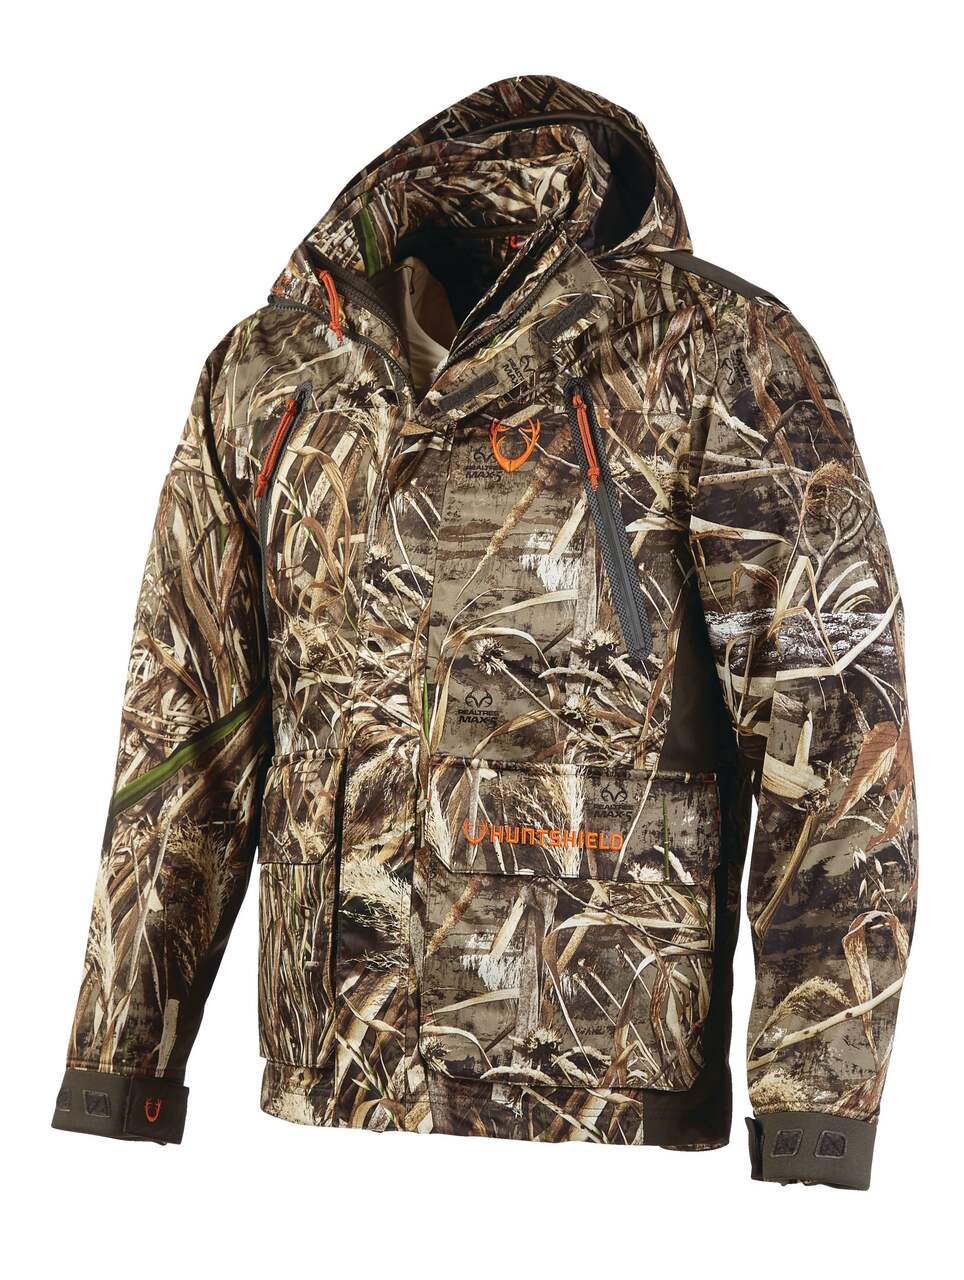 https://media-www.canadiantire.ca/product/playing/hunting/hunting-apparel-footwear/1758550/huntshield-mens-martins-3-in-1-waterfowl-jacket-m-max5-ac55b208-cec8-4021-ab05-ba77a02912c7-jpgrendition.jpg?imdensity=1&imwidth=640&impolicy=mZoom